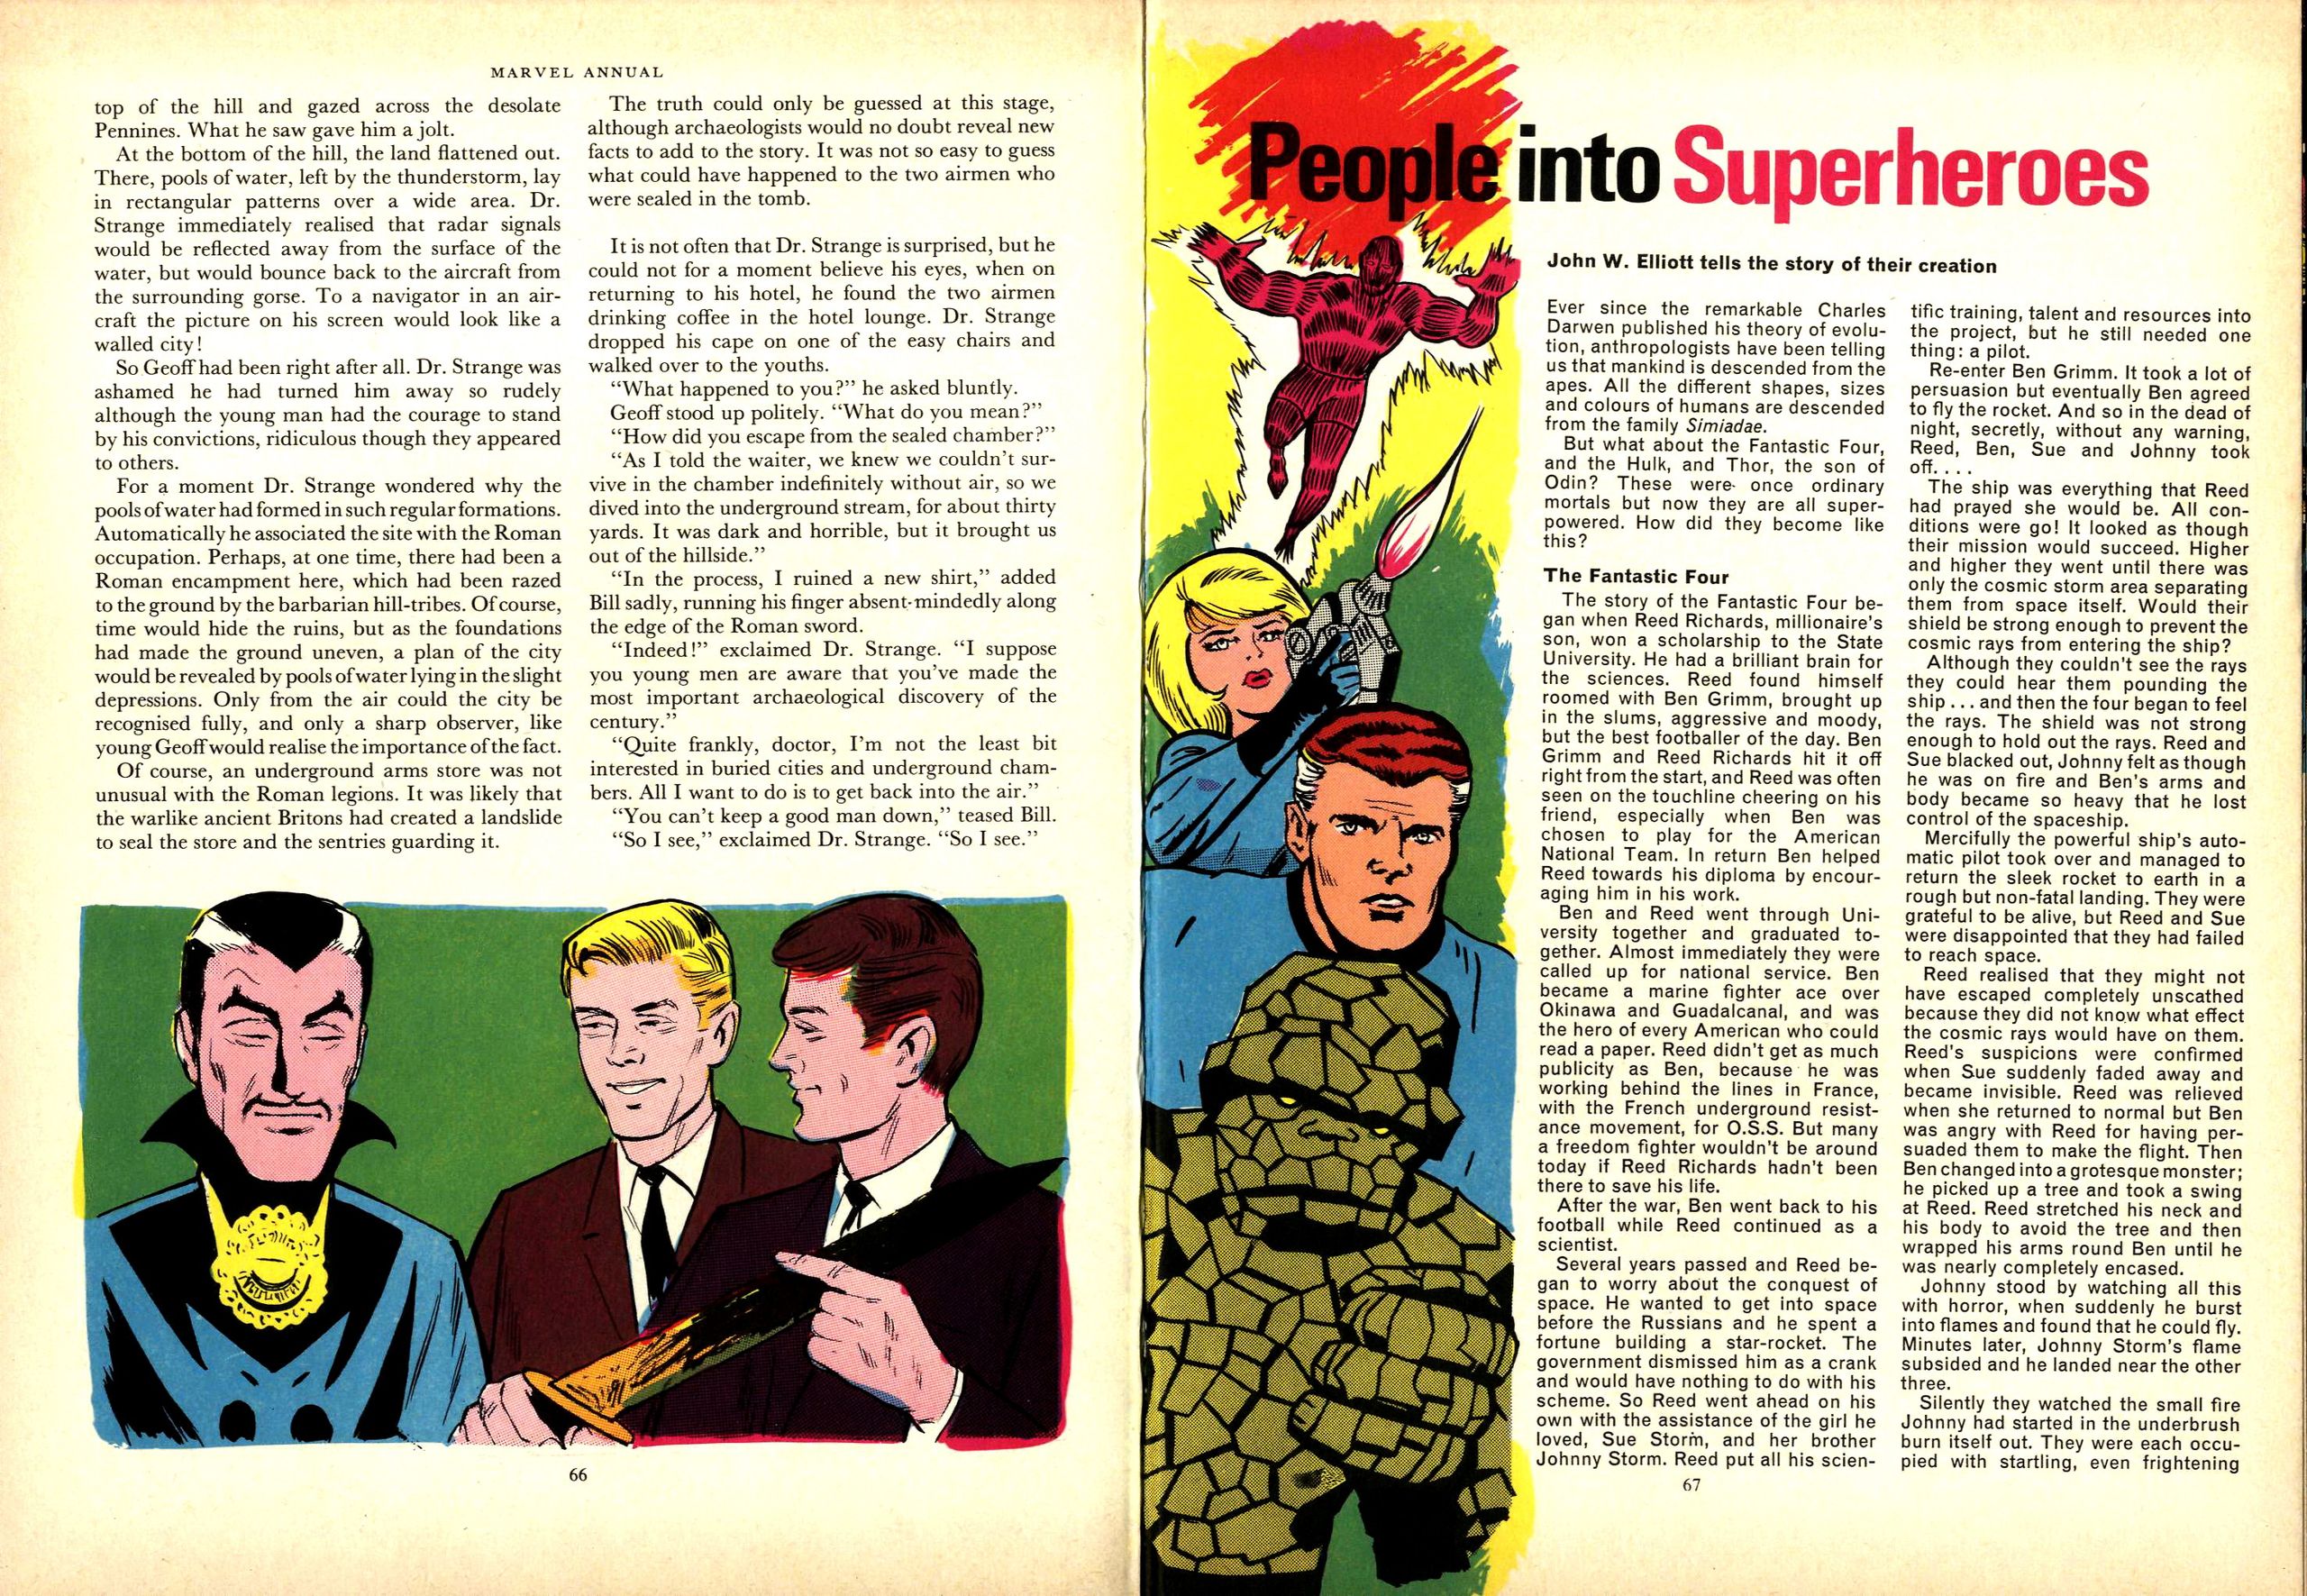 Read online Marvel Annual comic -  Issue #1967 - 34